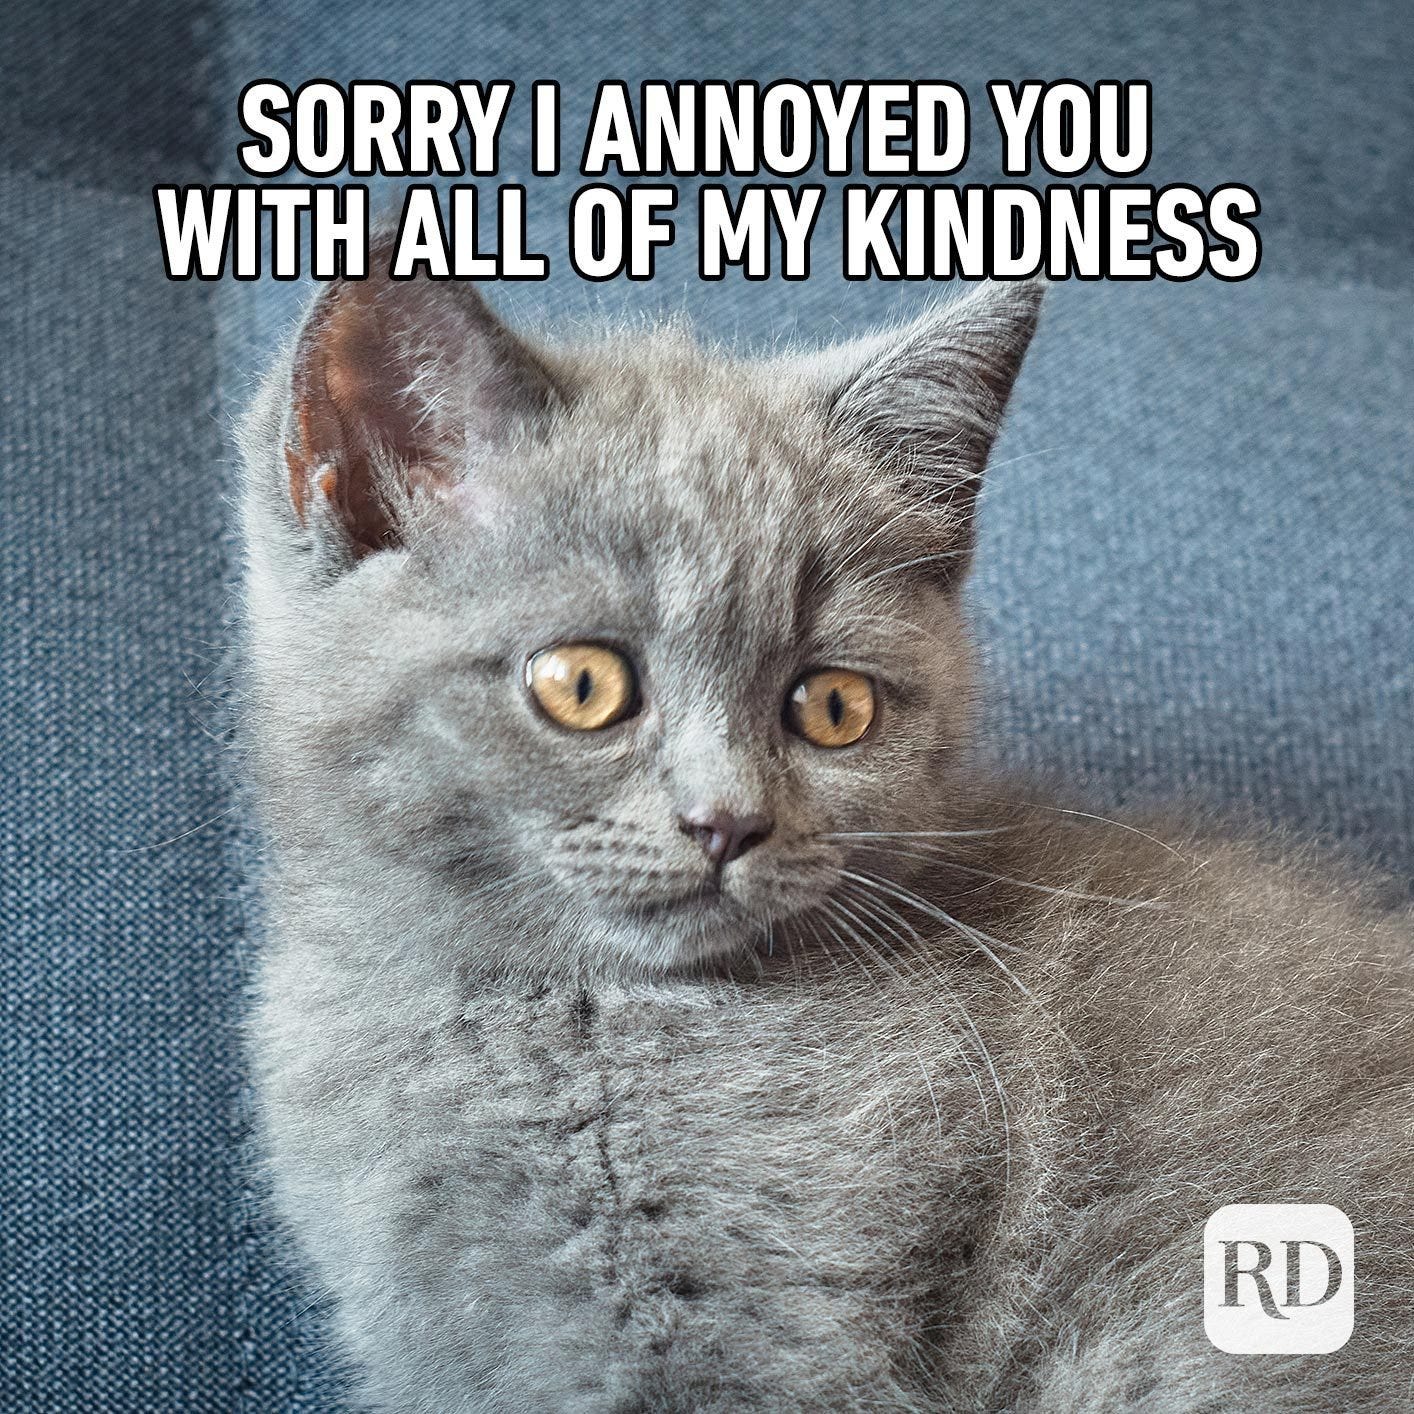 Cat looking very cute. Meme text: Sorry I annoyed you with all of my kindness